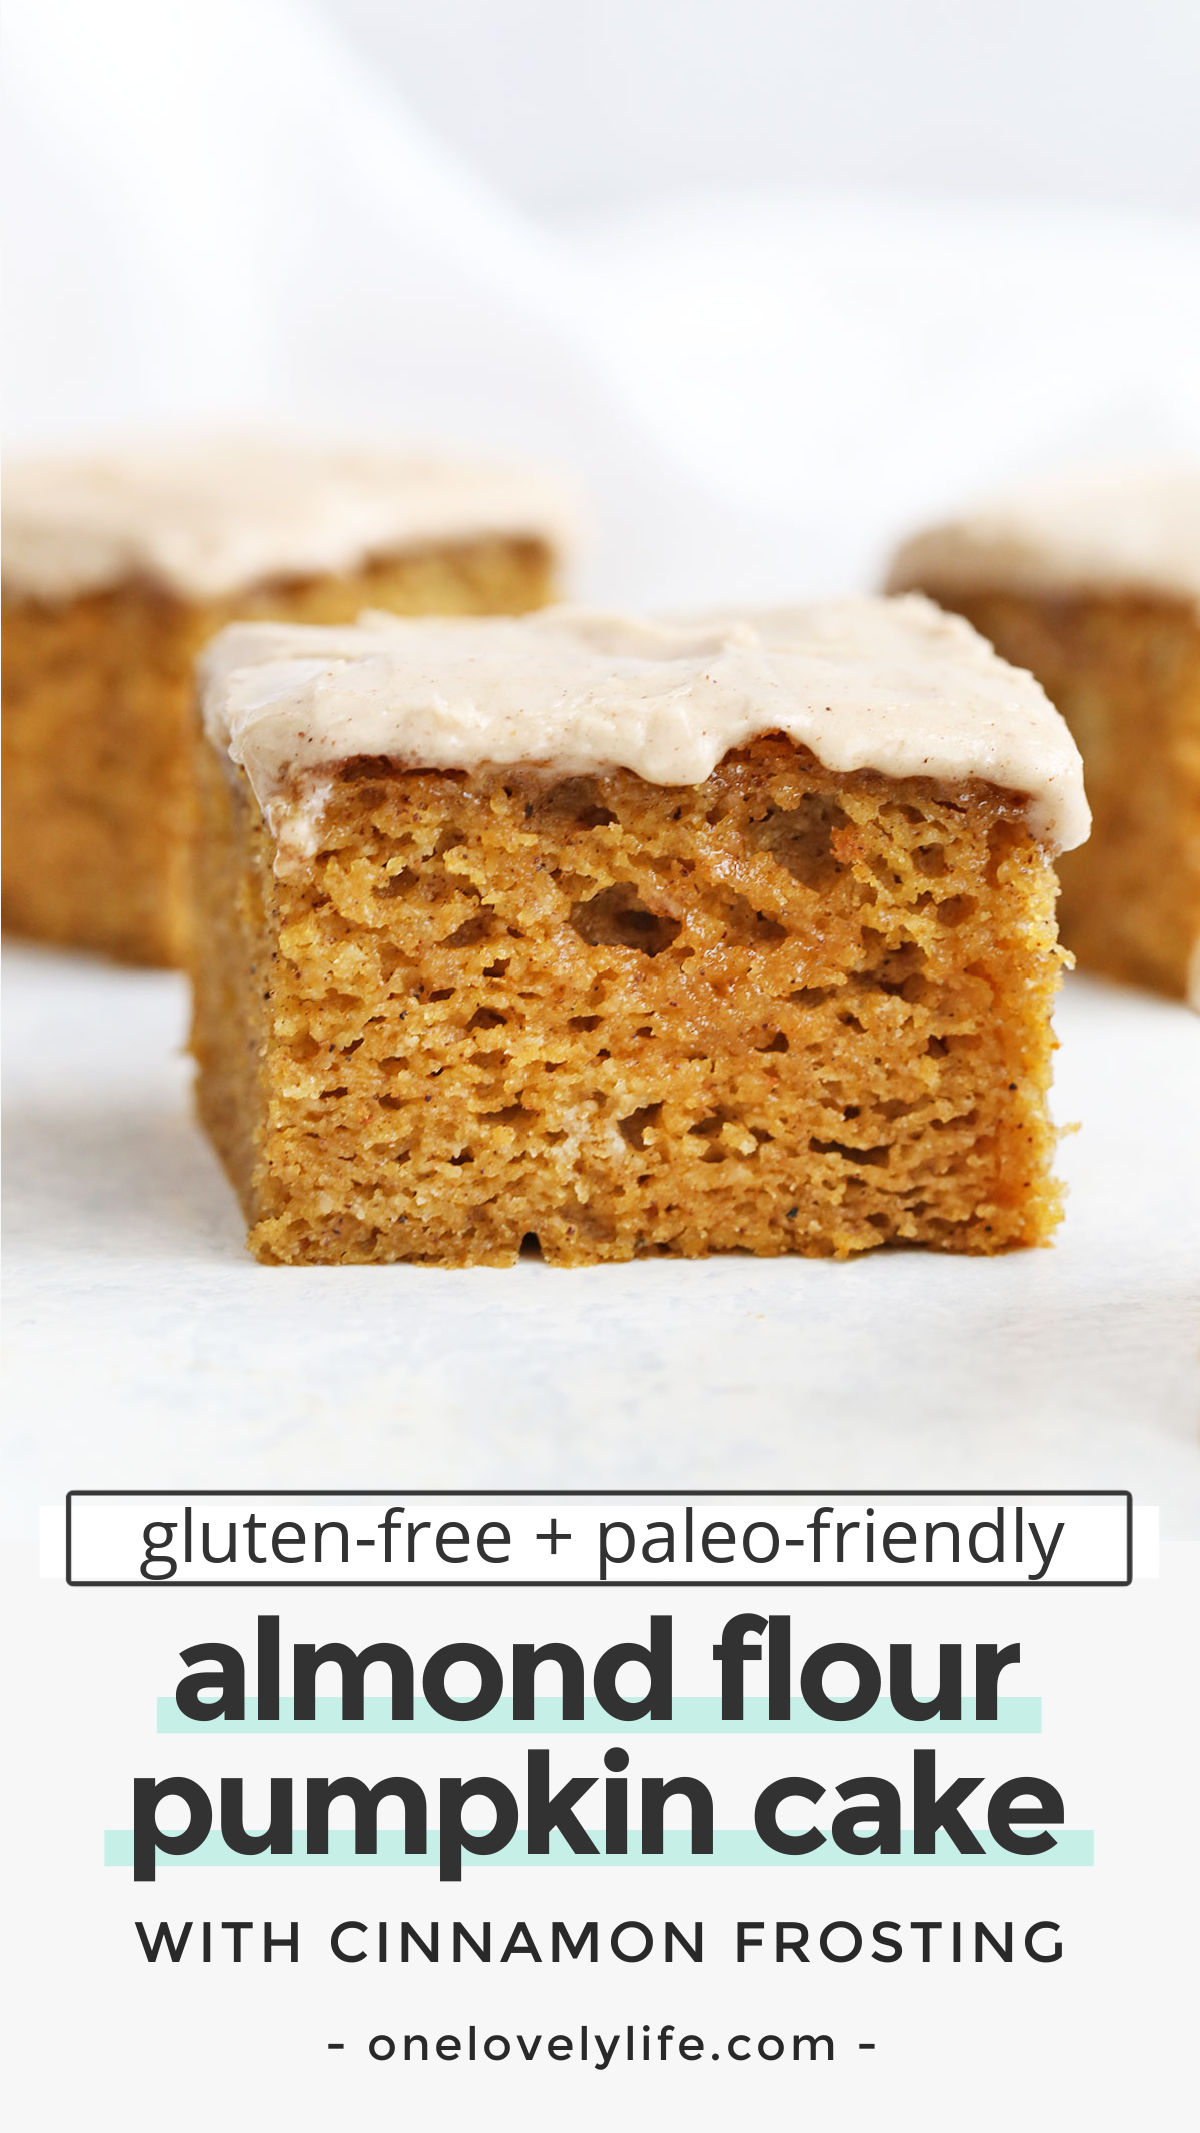 Gluten Free Pumpkin Cake with Cinnamon Frosting - This fluffy, perfectly-spiced pumpkin cake is what fall dreams are made of. It’s the best pumpkin cake I’ve ever tasted! (Paleo-Friendly) // The Best Pumpkin Cake Recipe // Almond flour Pumpkin Cake #glutenfree #cake #pumpkincake #pumpkin #frosting